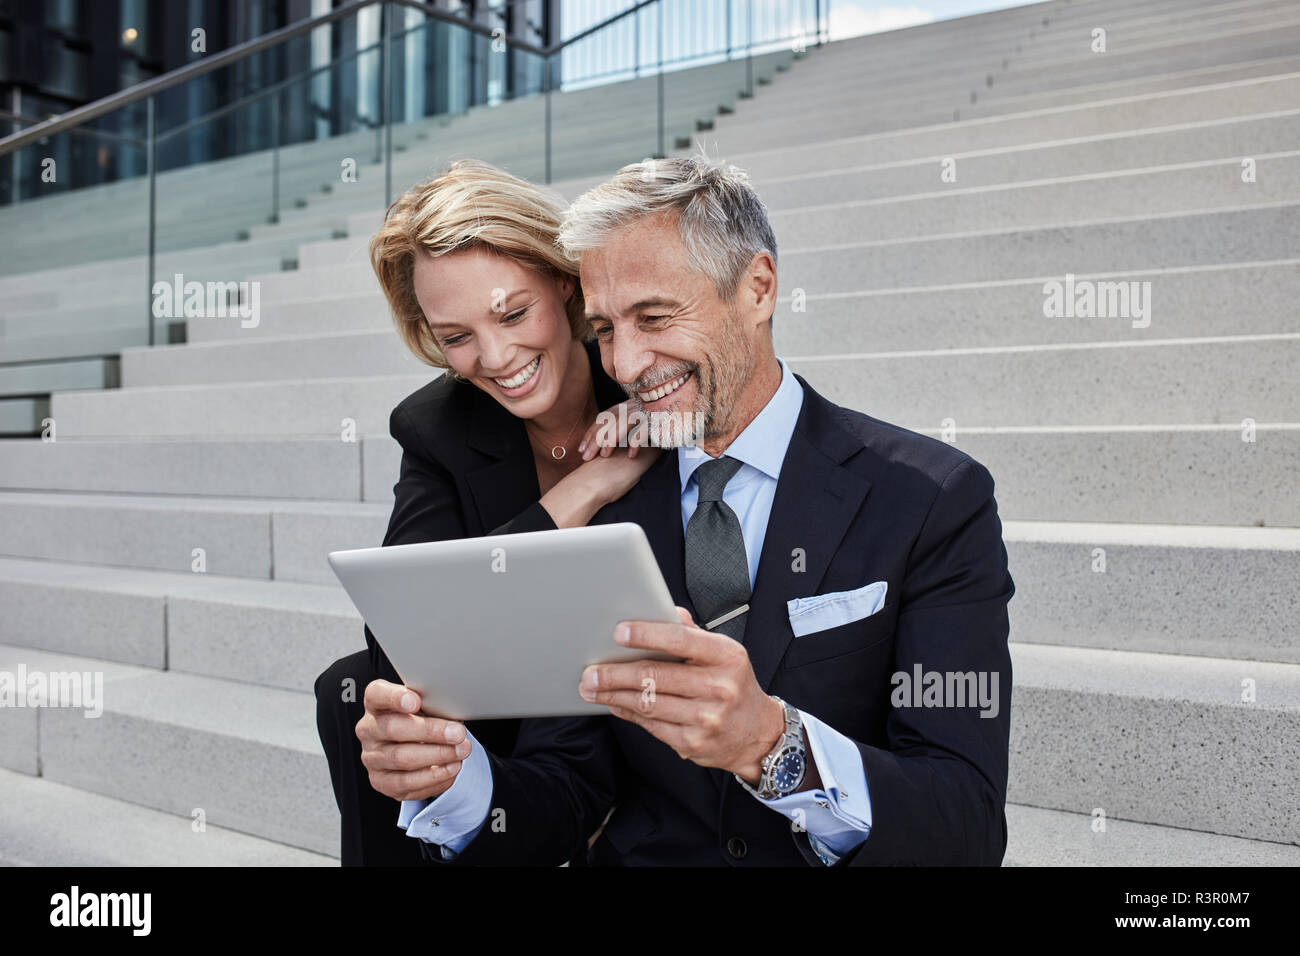 Portrait of two laughing businesspeople sitting together on stairs looking at tablet Stock Photo